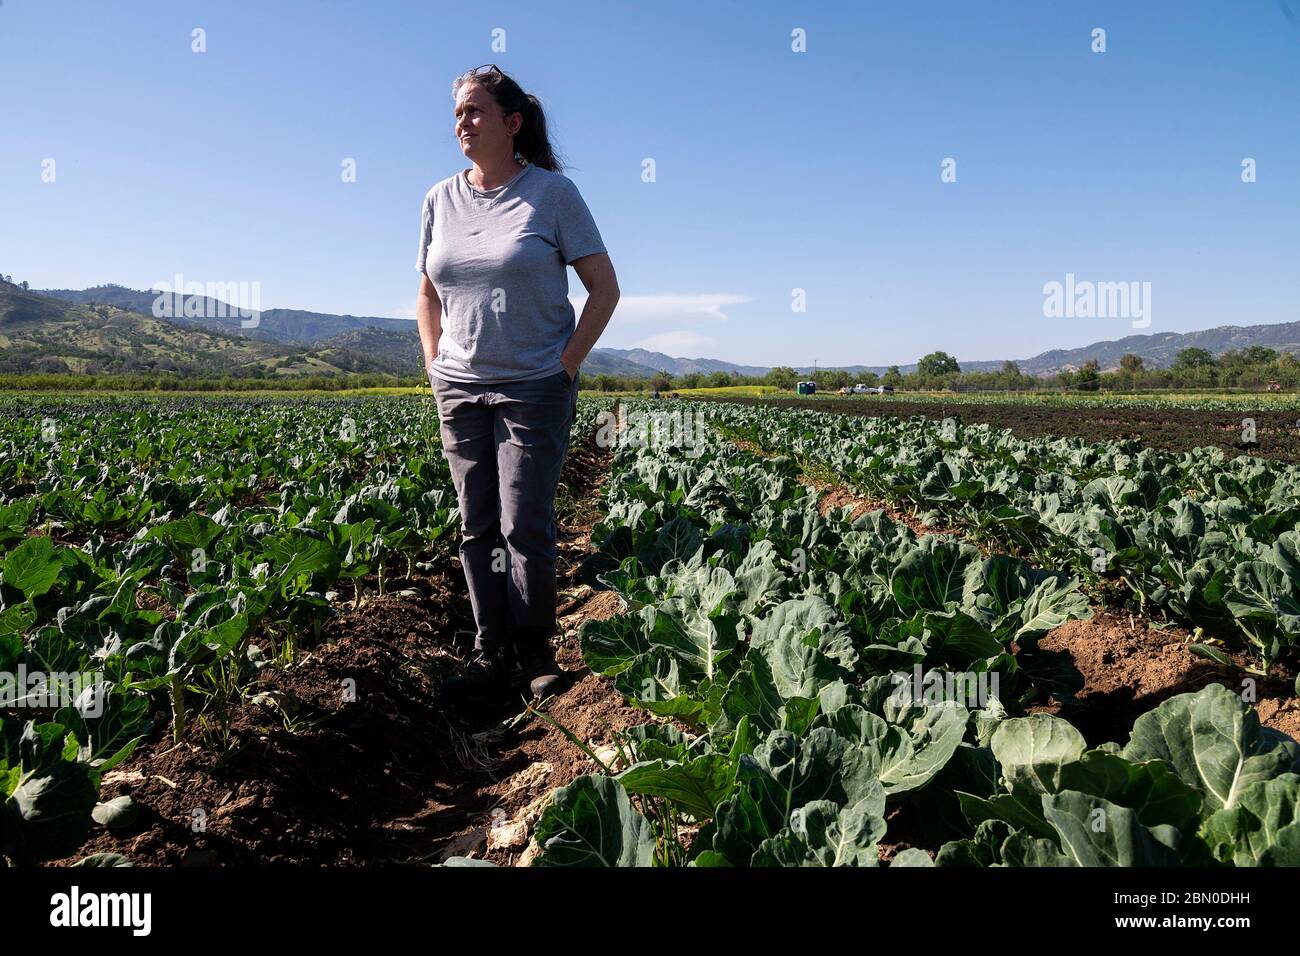 Brooks, California, USA. 16th Apr, 2020. Organic farmer TRINI CAMPBELL of Riverdog Farm in Guida stands is one of her collard greens fields during the coronavirus pandemic. Riverdog Farm works 450 acres of land in the Capay Valley and her company has had four-fold increase in sale of the CSA (community supported agriculture) boxes of fresh produce as her restaurants sales have diminished. Credit: Paul Kitagaki Jr/Sacramento Bee/ZUMA Wire/Alamy Live News Stock Photo